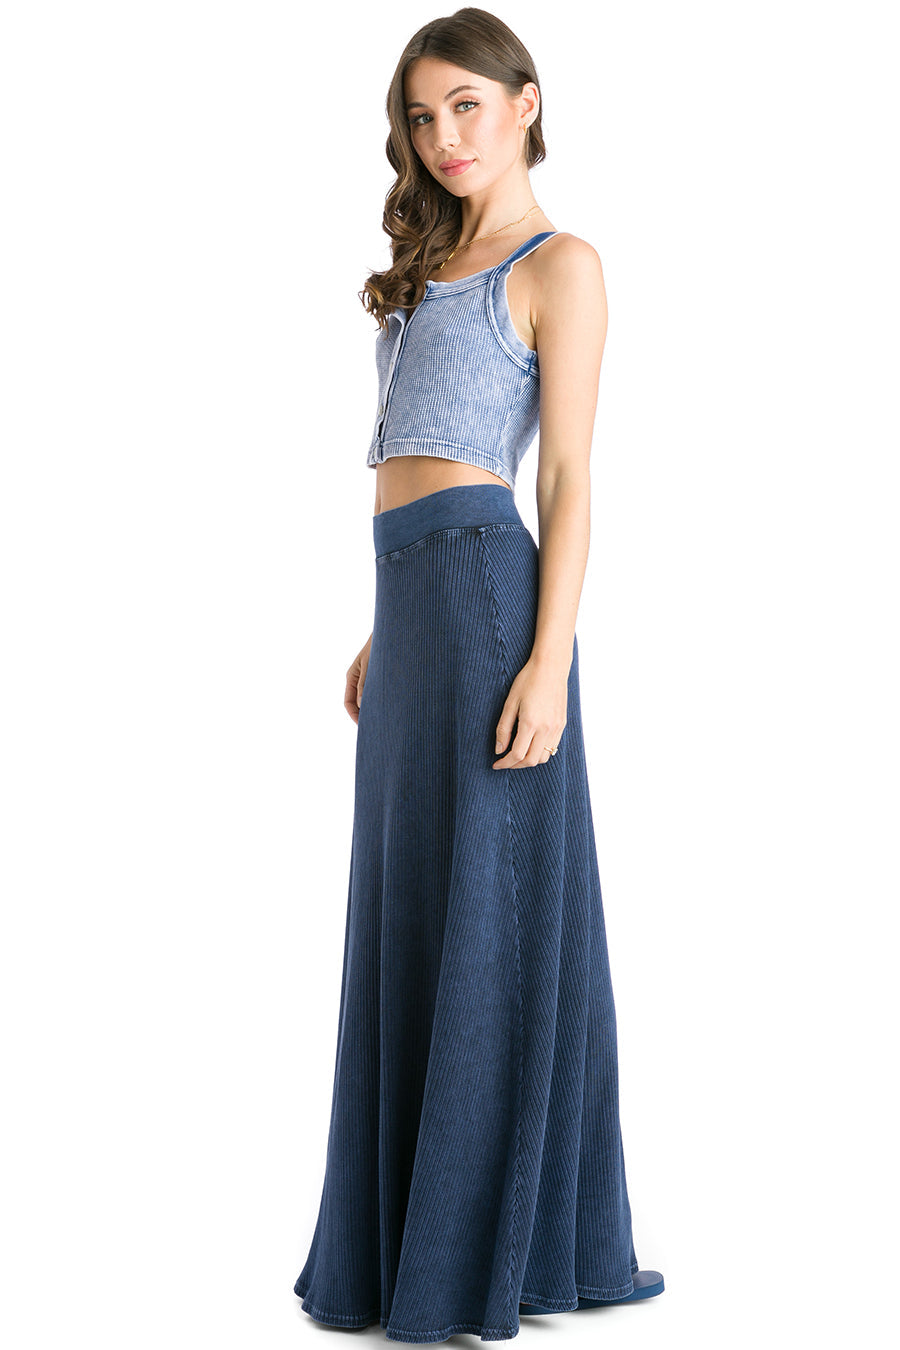 Hardtail Wide Ribbed Maxi Skater Skirt